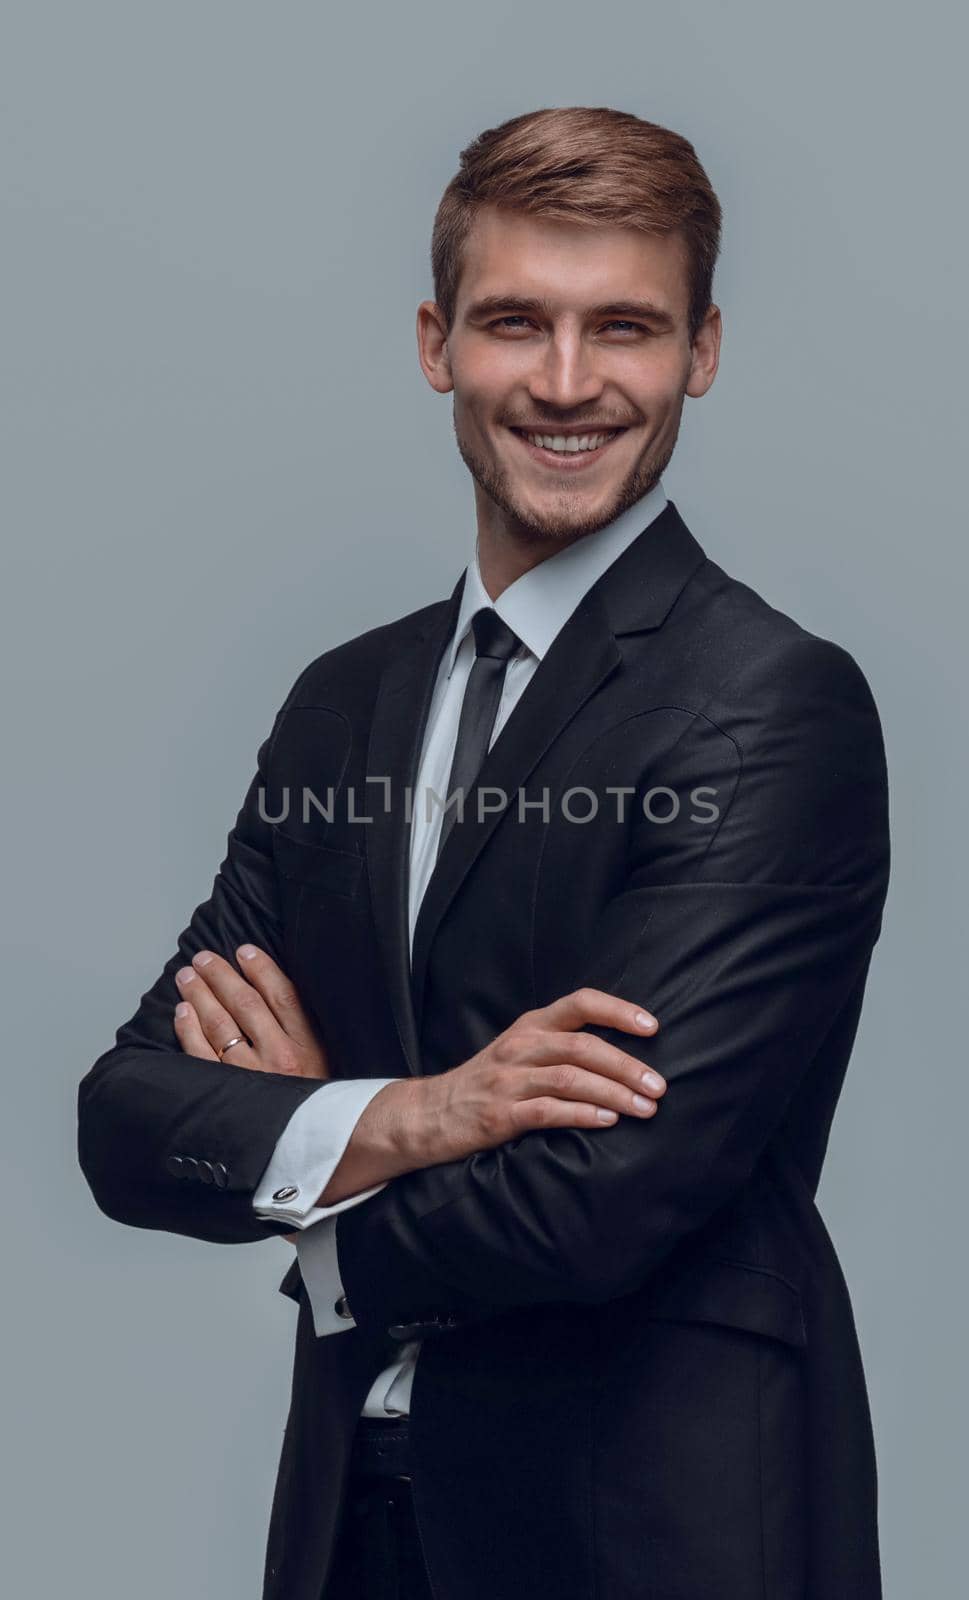 portrait of smiling successful businessman by asdf